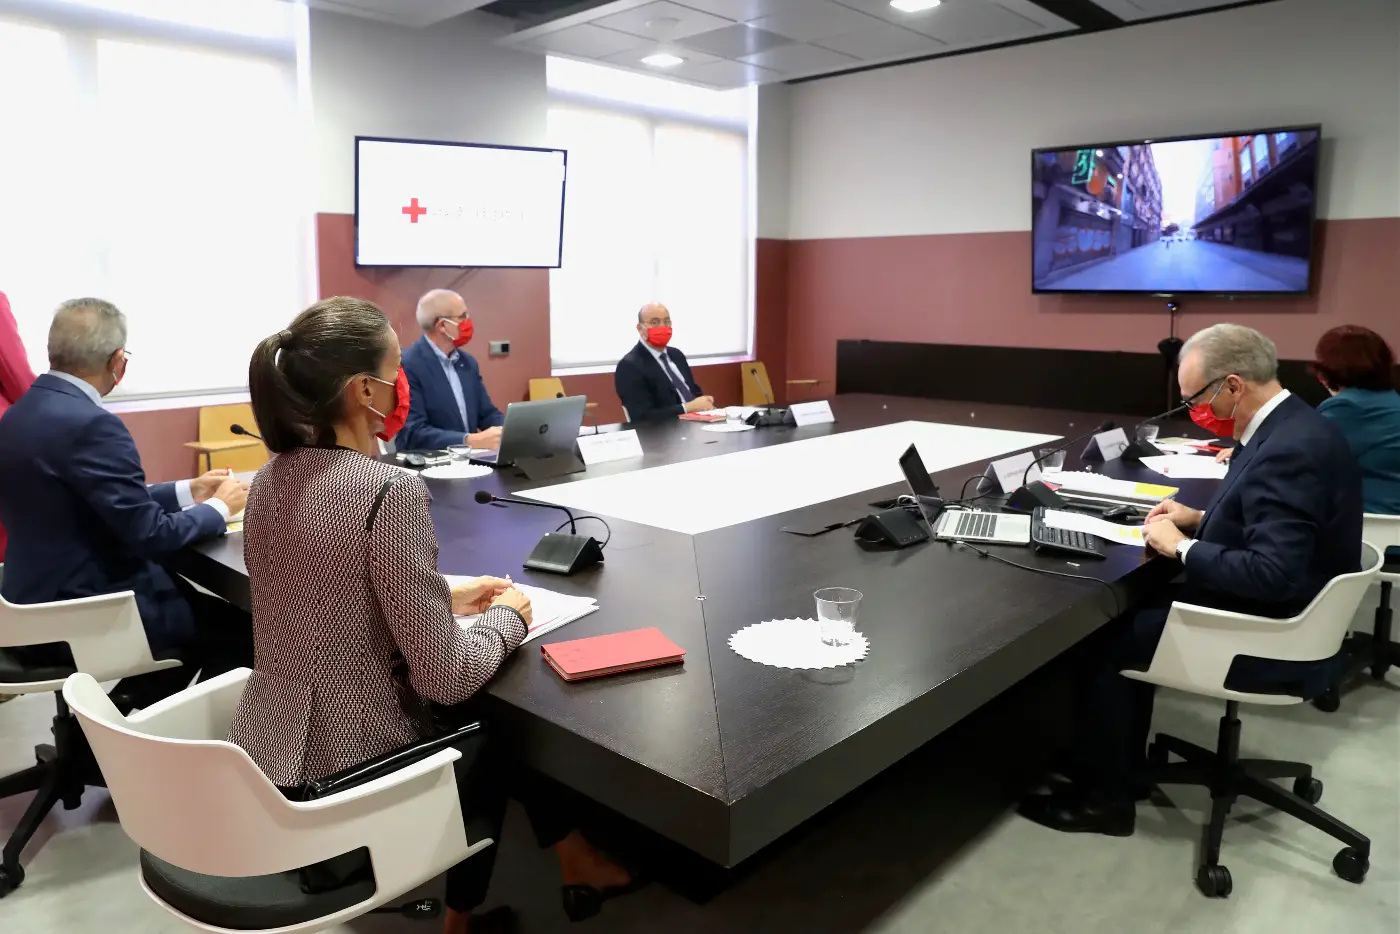 Queen Letizia of Spain attended Spanish Red cross meeting at its headquarter in madrid